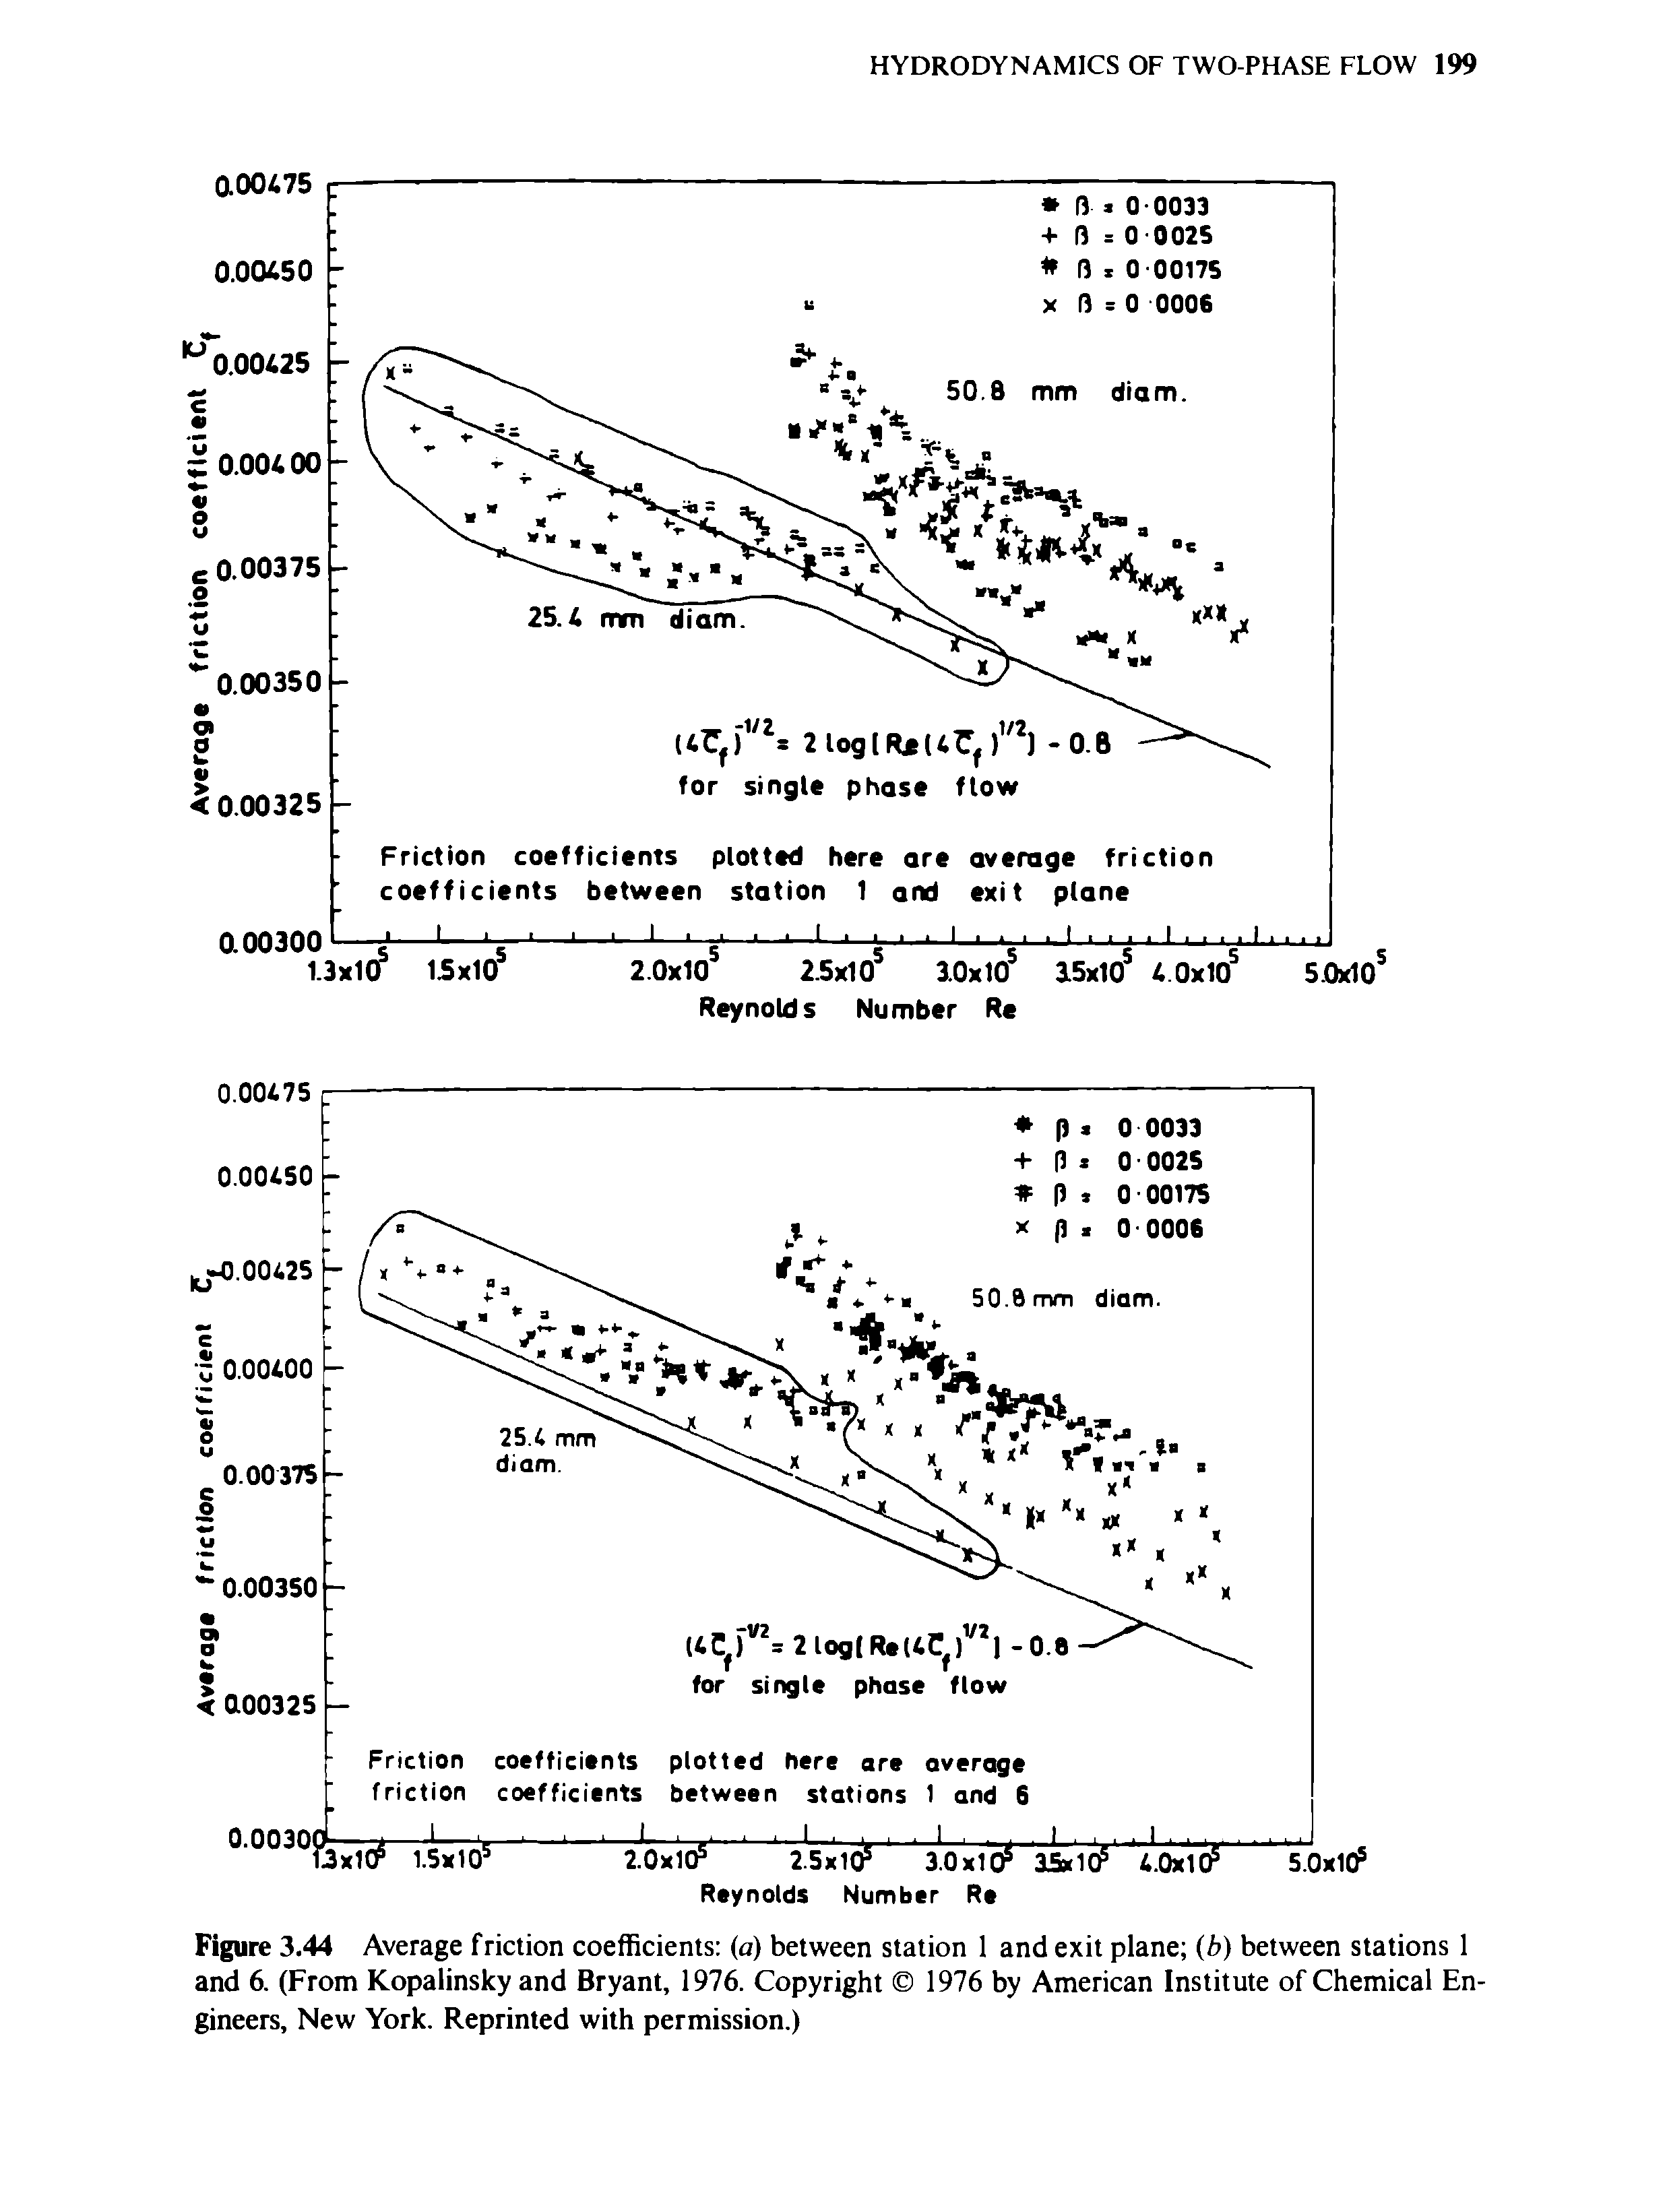 Figure 3.44 Average friction coefficients (a) between station 1 and exit plane (b) between stations 1 and 6. (From Kopalinsky and Bryant, 1976. Copyright 1976 by American Institute of Chemical Engineers, New York. Reprinted with permission.)...